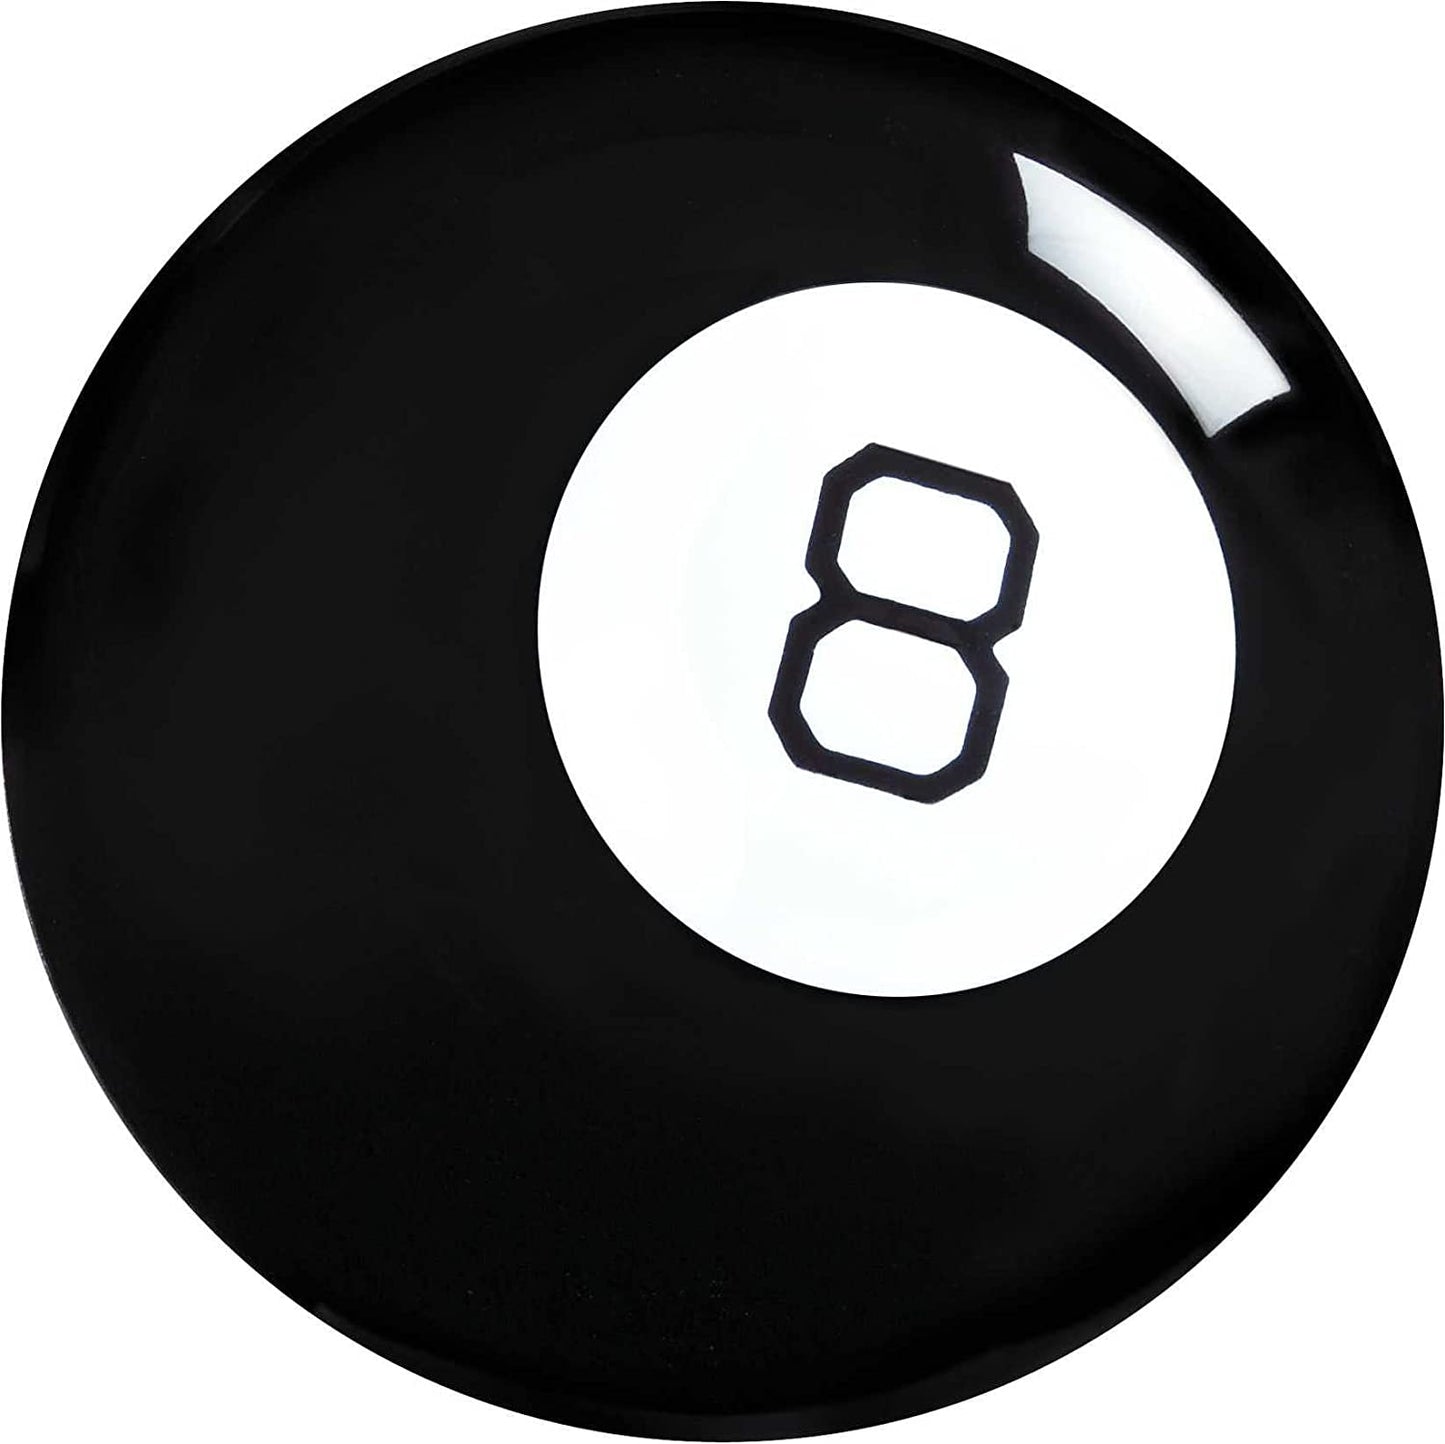 Magic 8 Ball Kids Toy, Retro Themed Novelty Fortune Teller, Ask a Question and Turn over for Answer (Amazon Exclusive)